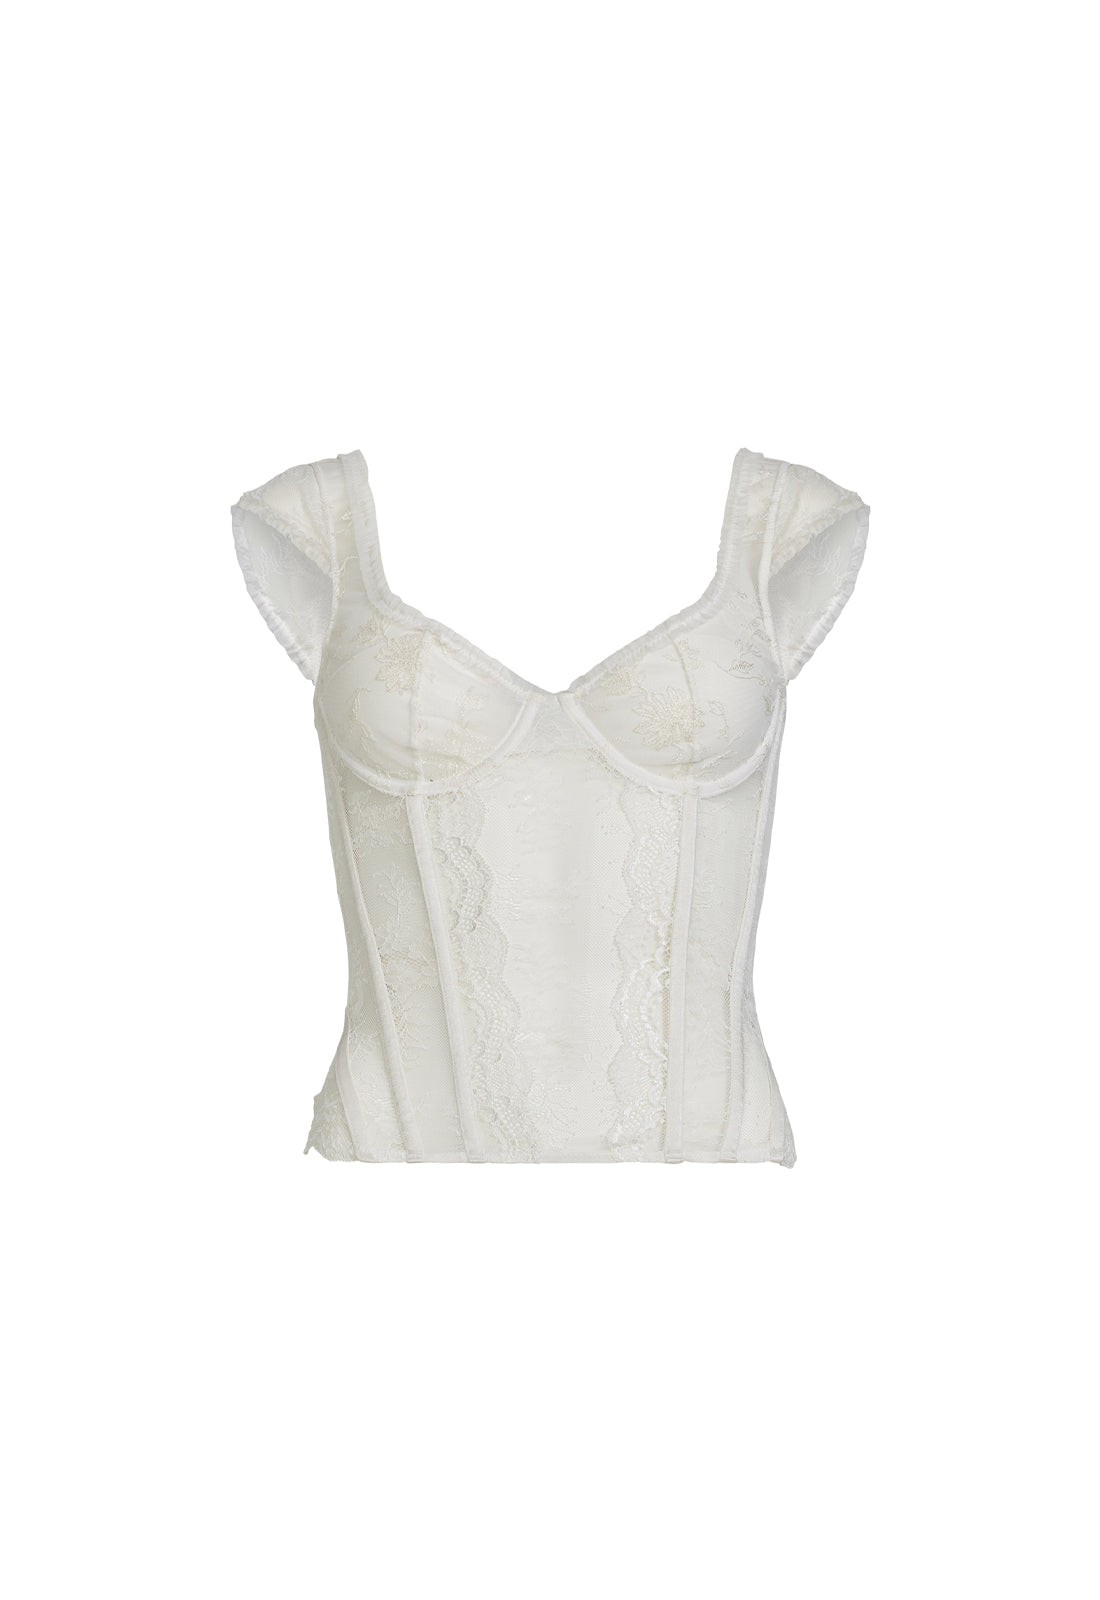 SOME LIKE IT HOT LACE CORSET - GHOST WHITE – LIONESS FASHION